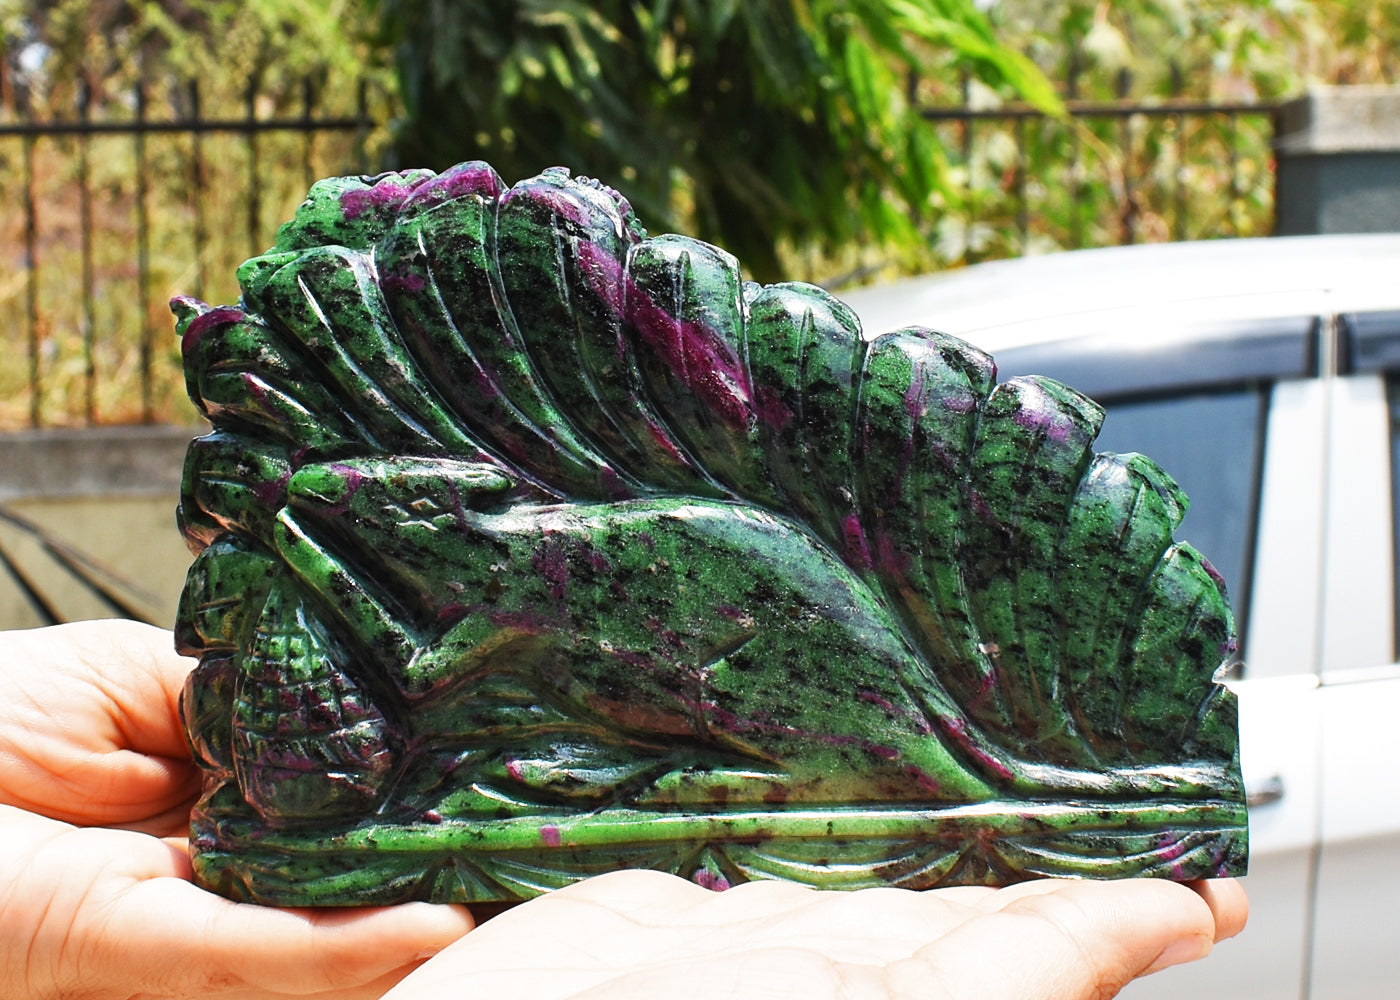 Amazing 7950.00 Cts Genuine Ruby Zoisite Hand Carved Crystal Gemstone Lord Ganesha Carving